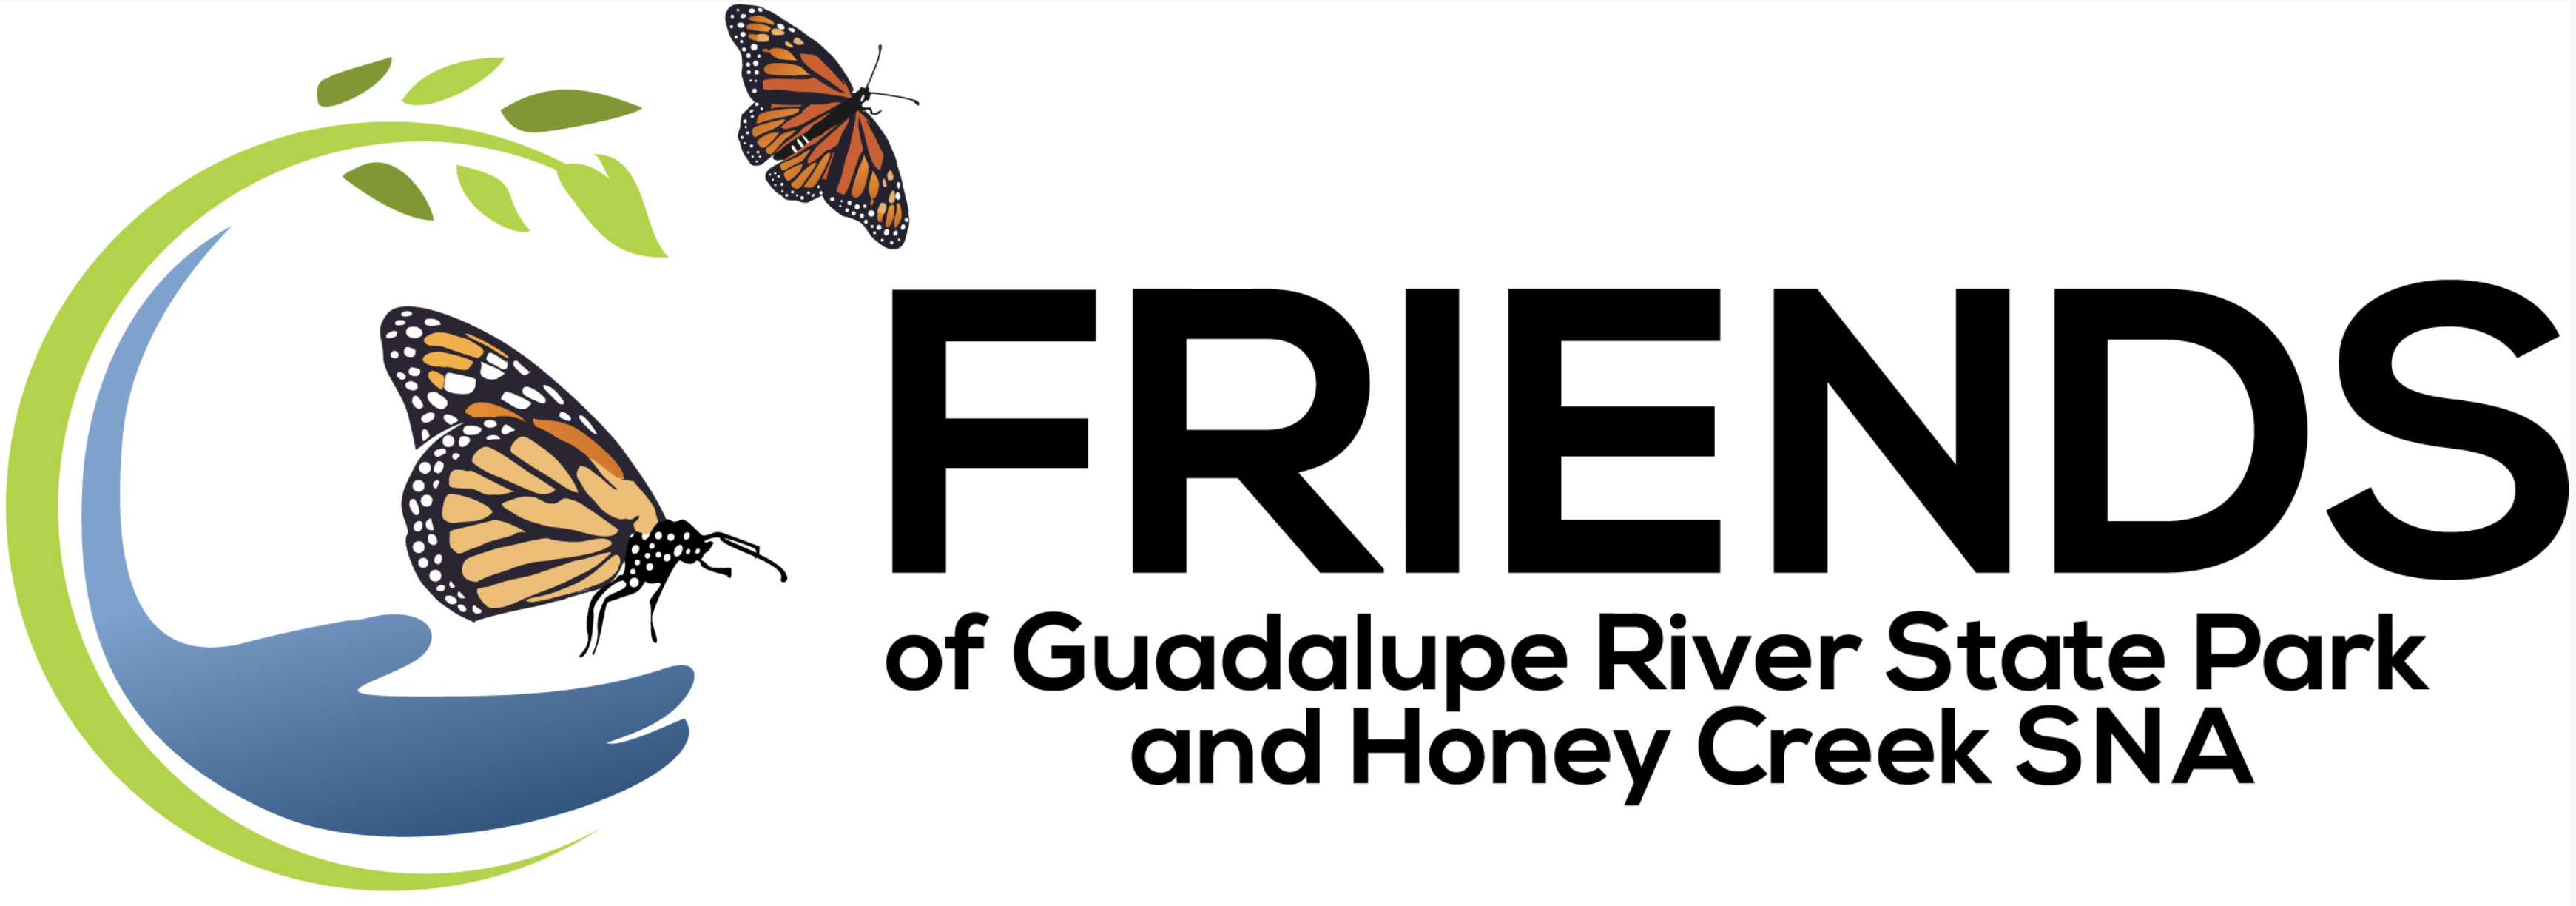 Friends of Guadalupe River State Park and Honey Creek Natural Area